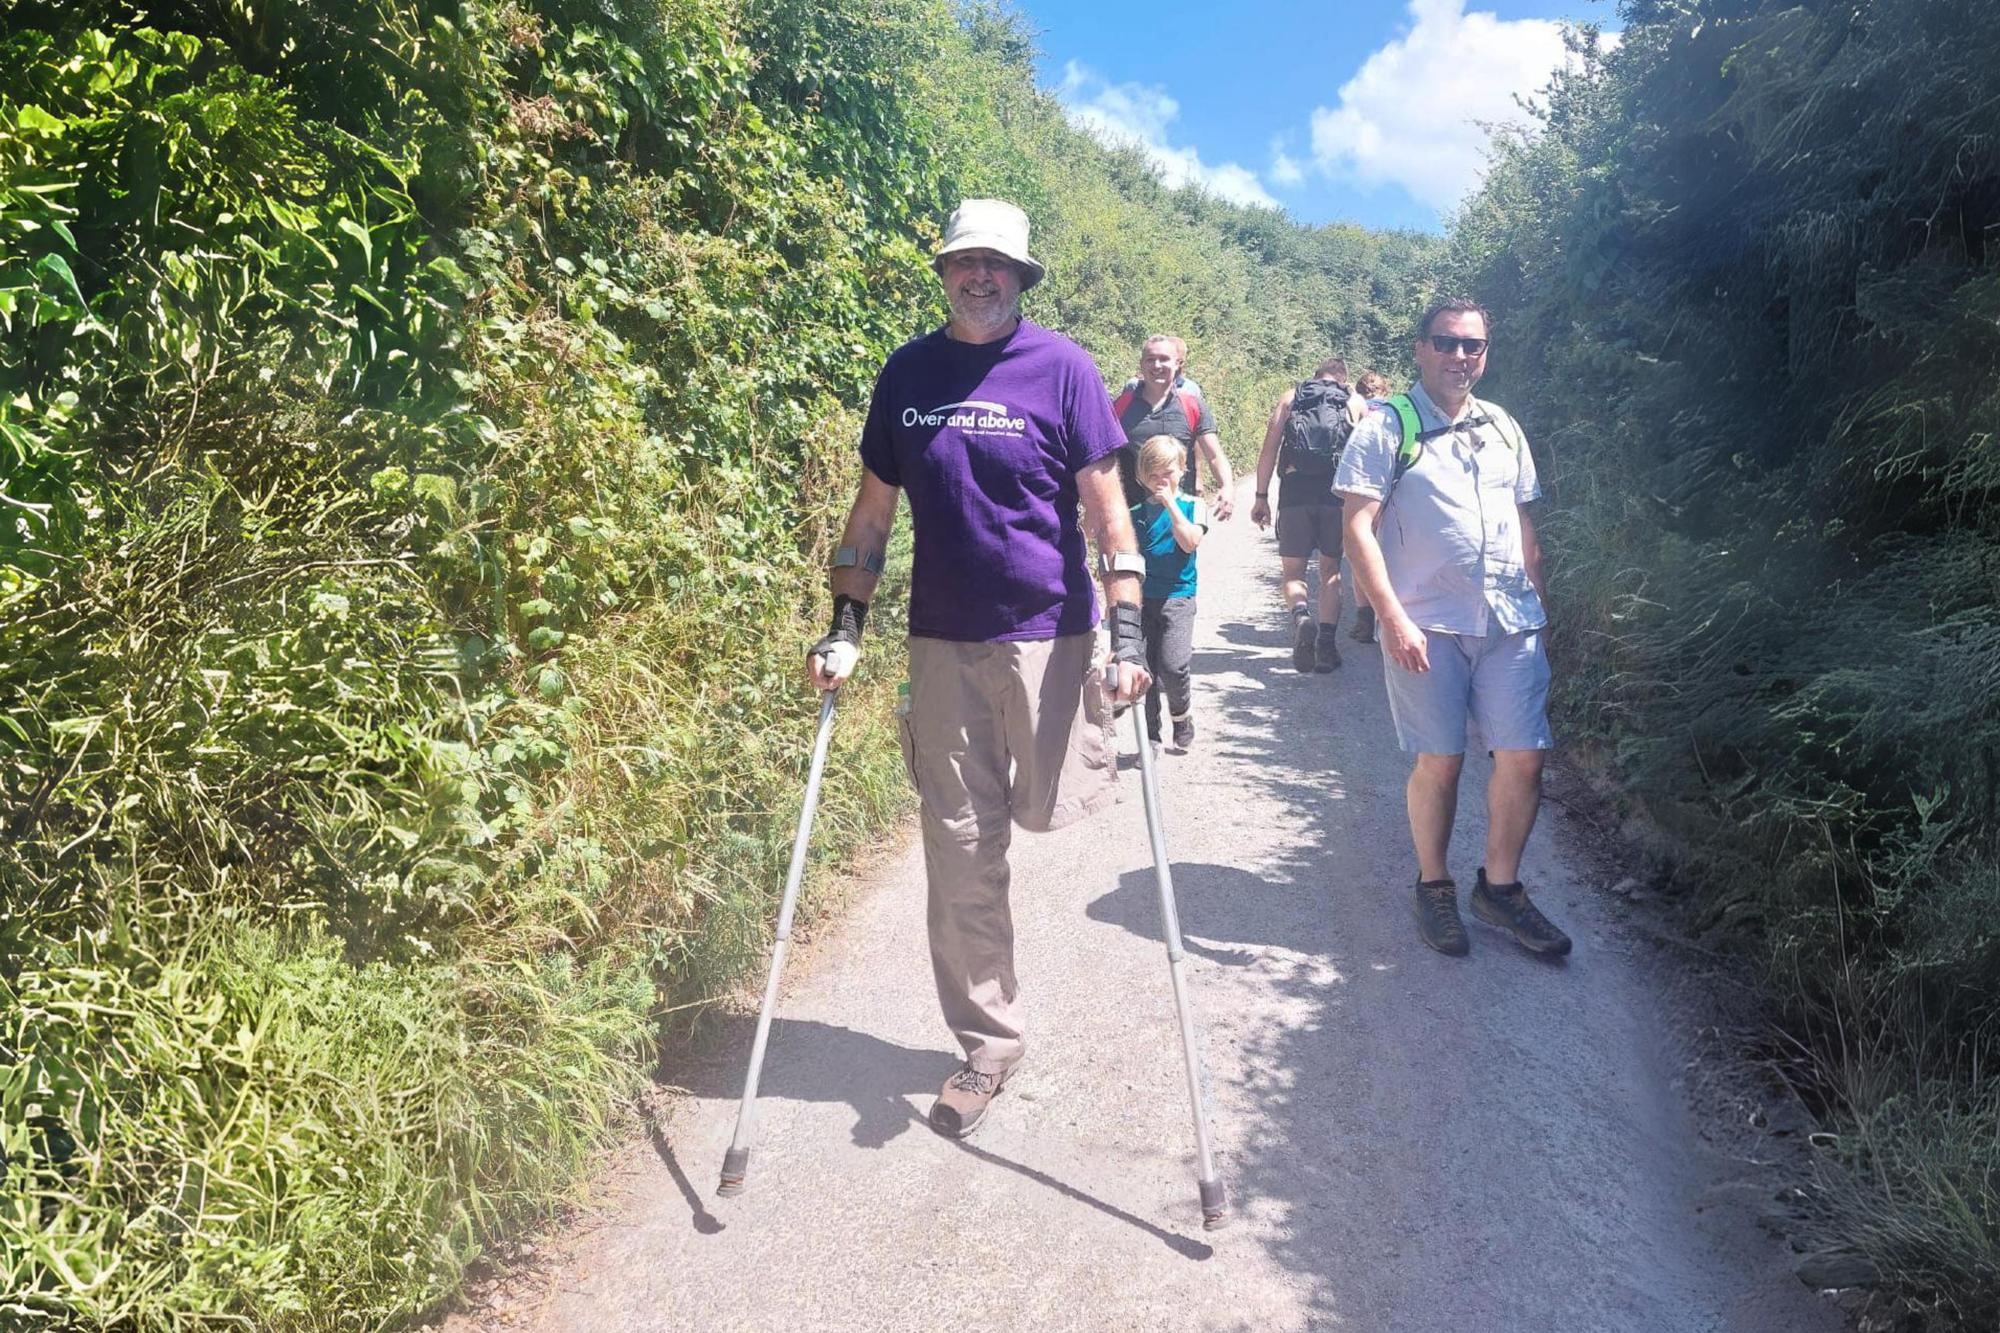 Richard Barnes from Ilfracombe completes another fundraising challenge to raise money for his local hospital